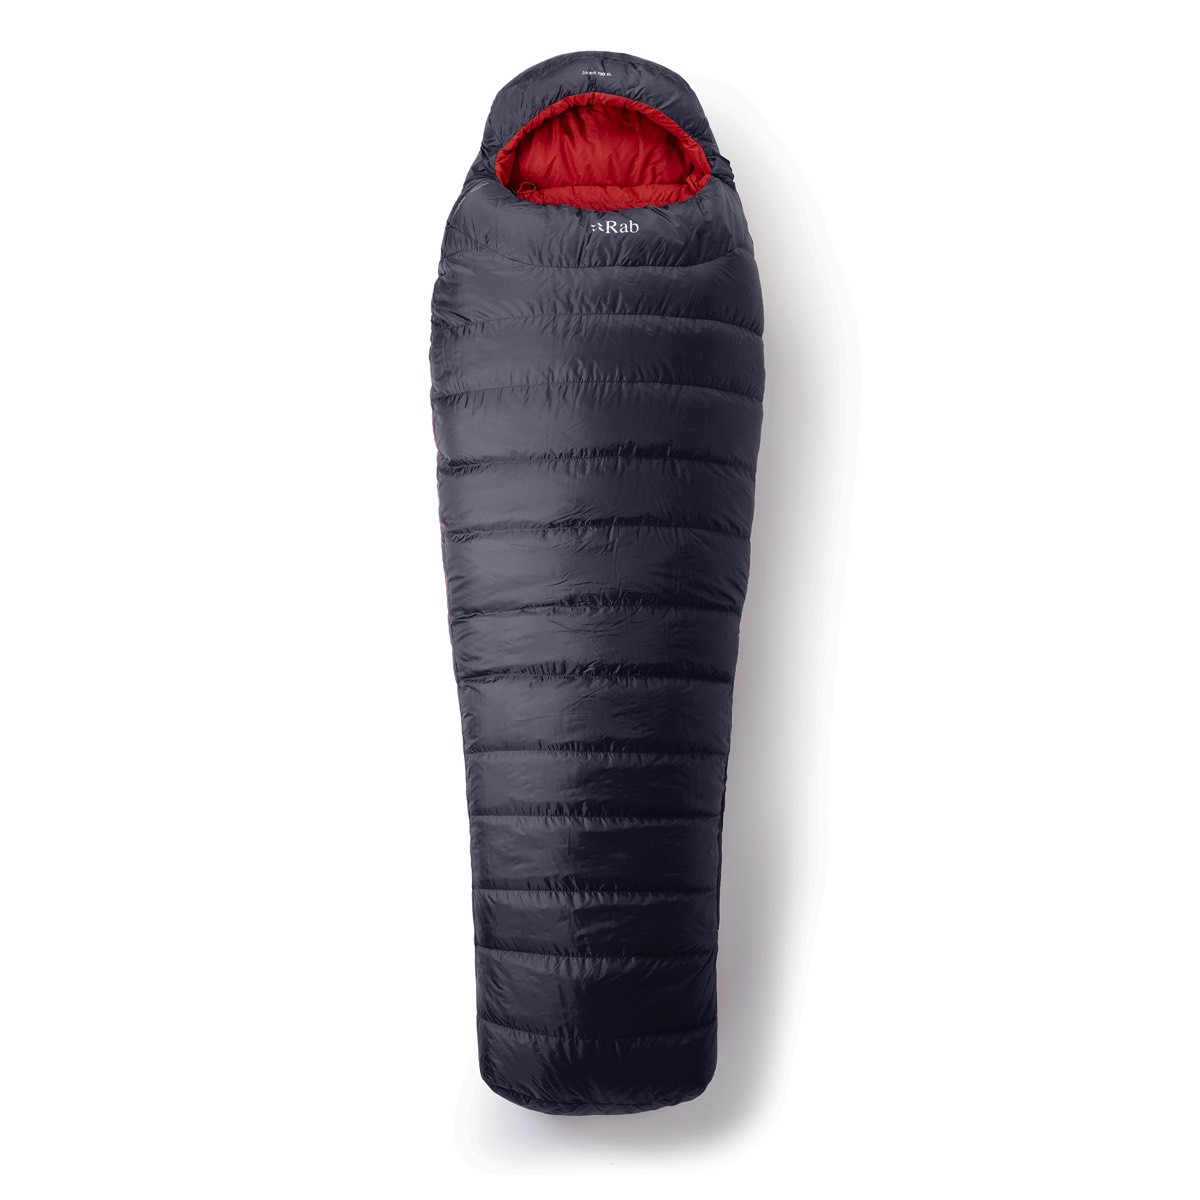 Rab Ascent 700 extra long left